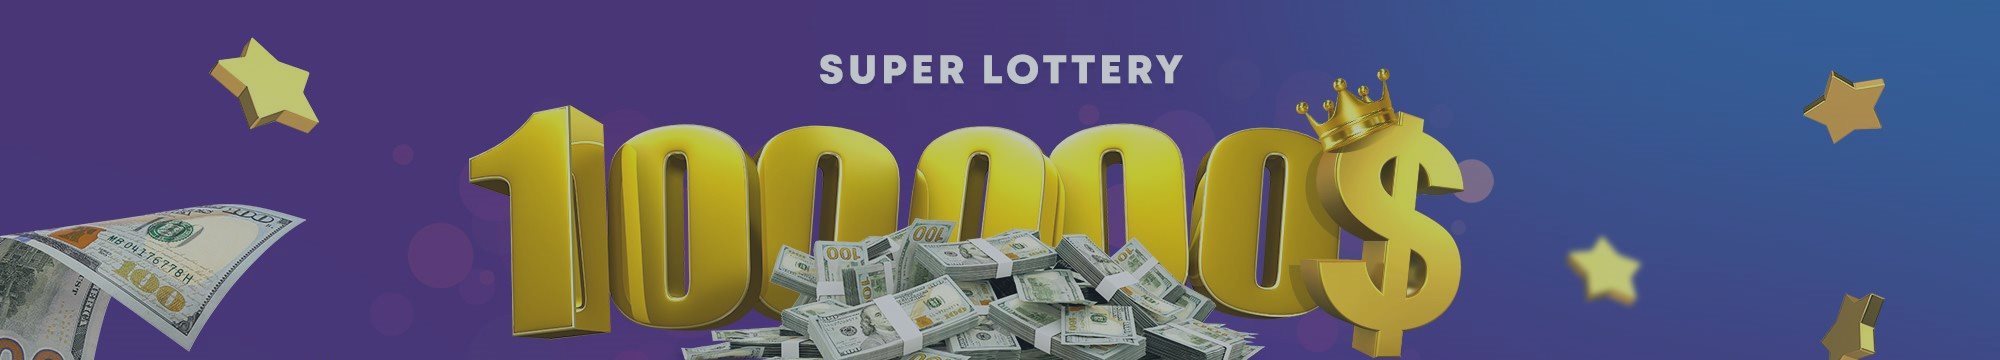 Mega Super Lottery: NordFX to Give Away Another $100,000 to Traders in 2023